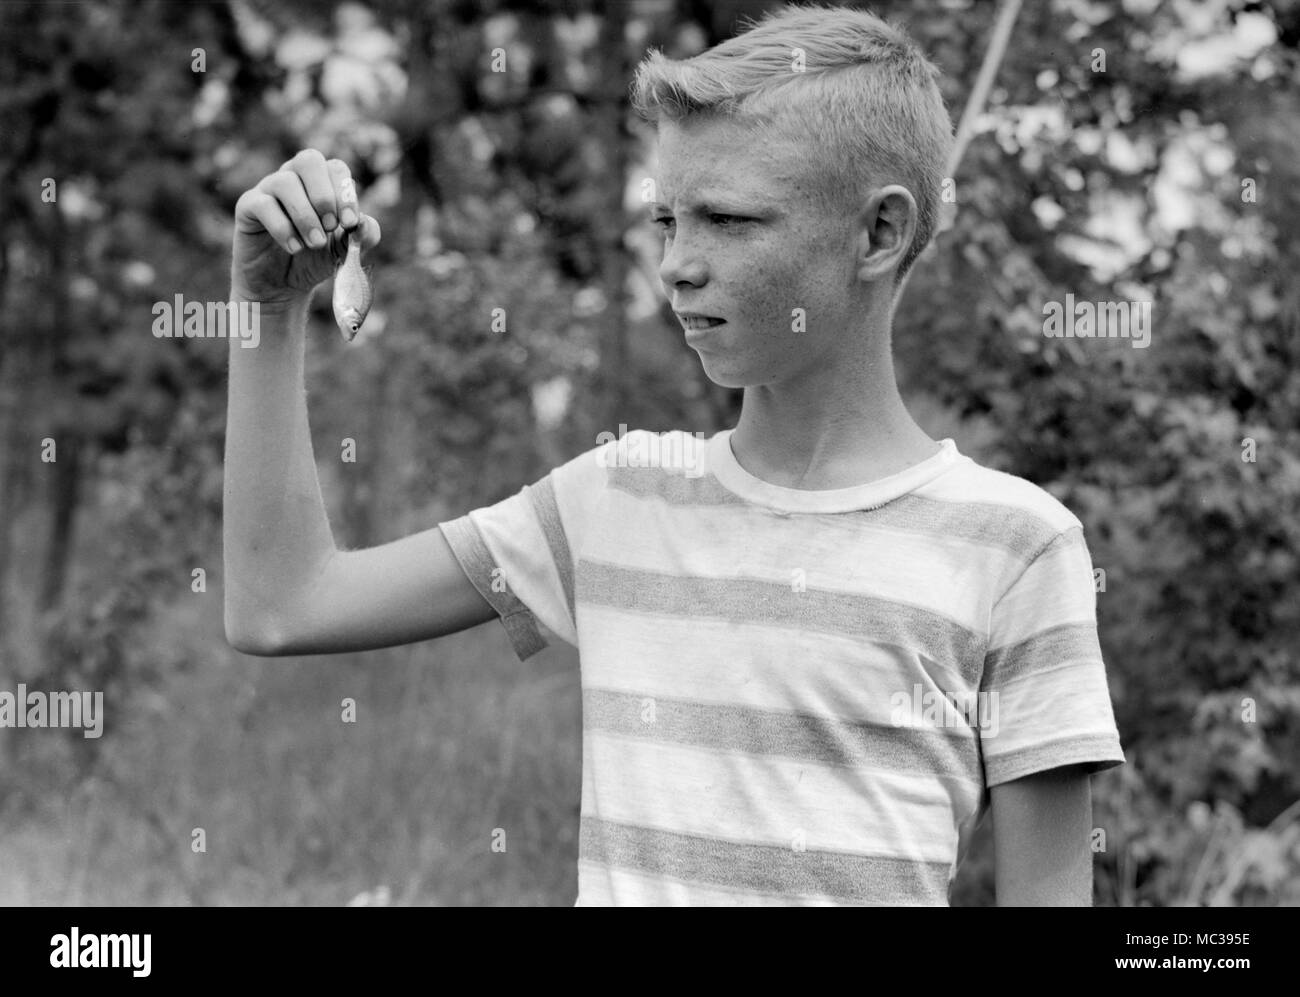 A young boy appears to be apprehensive abour the size of his catch, ca. 1960. Stock Photo